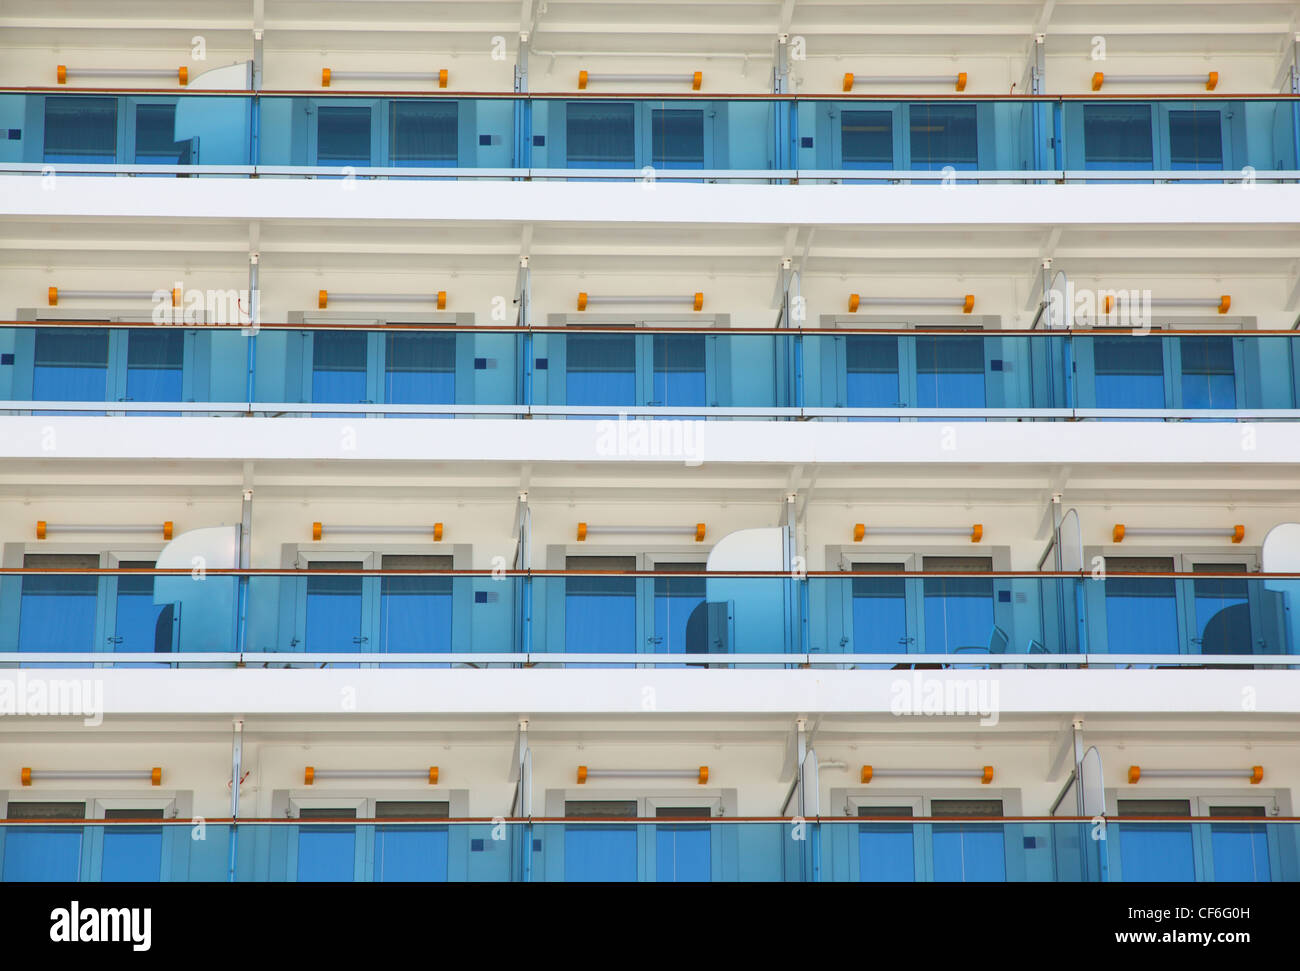 Exterior at rooms of multistory liner, balcony on cruise ship Stock Photo